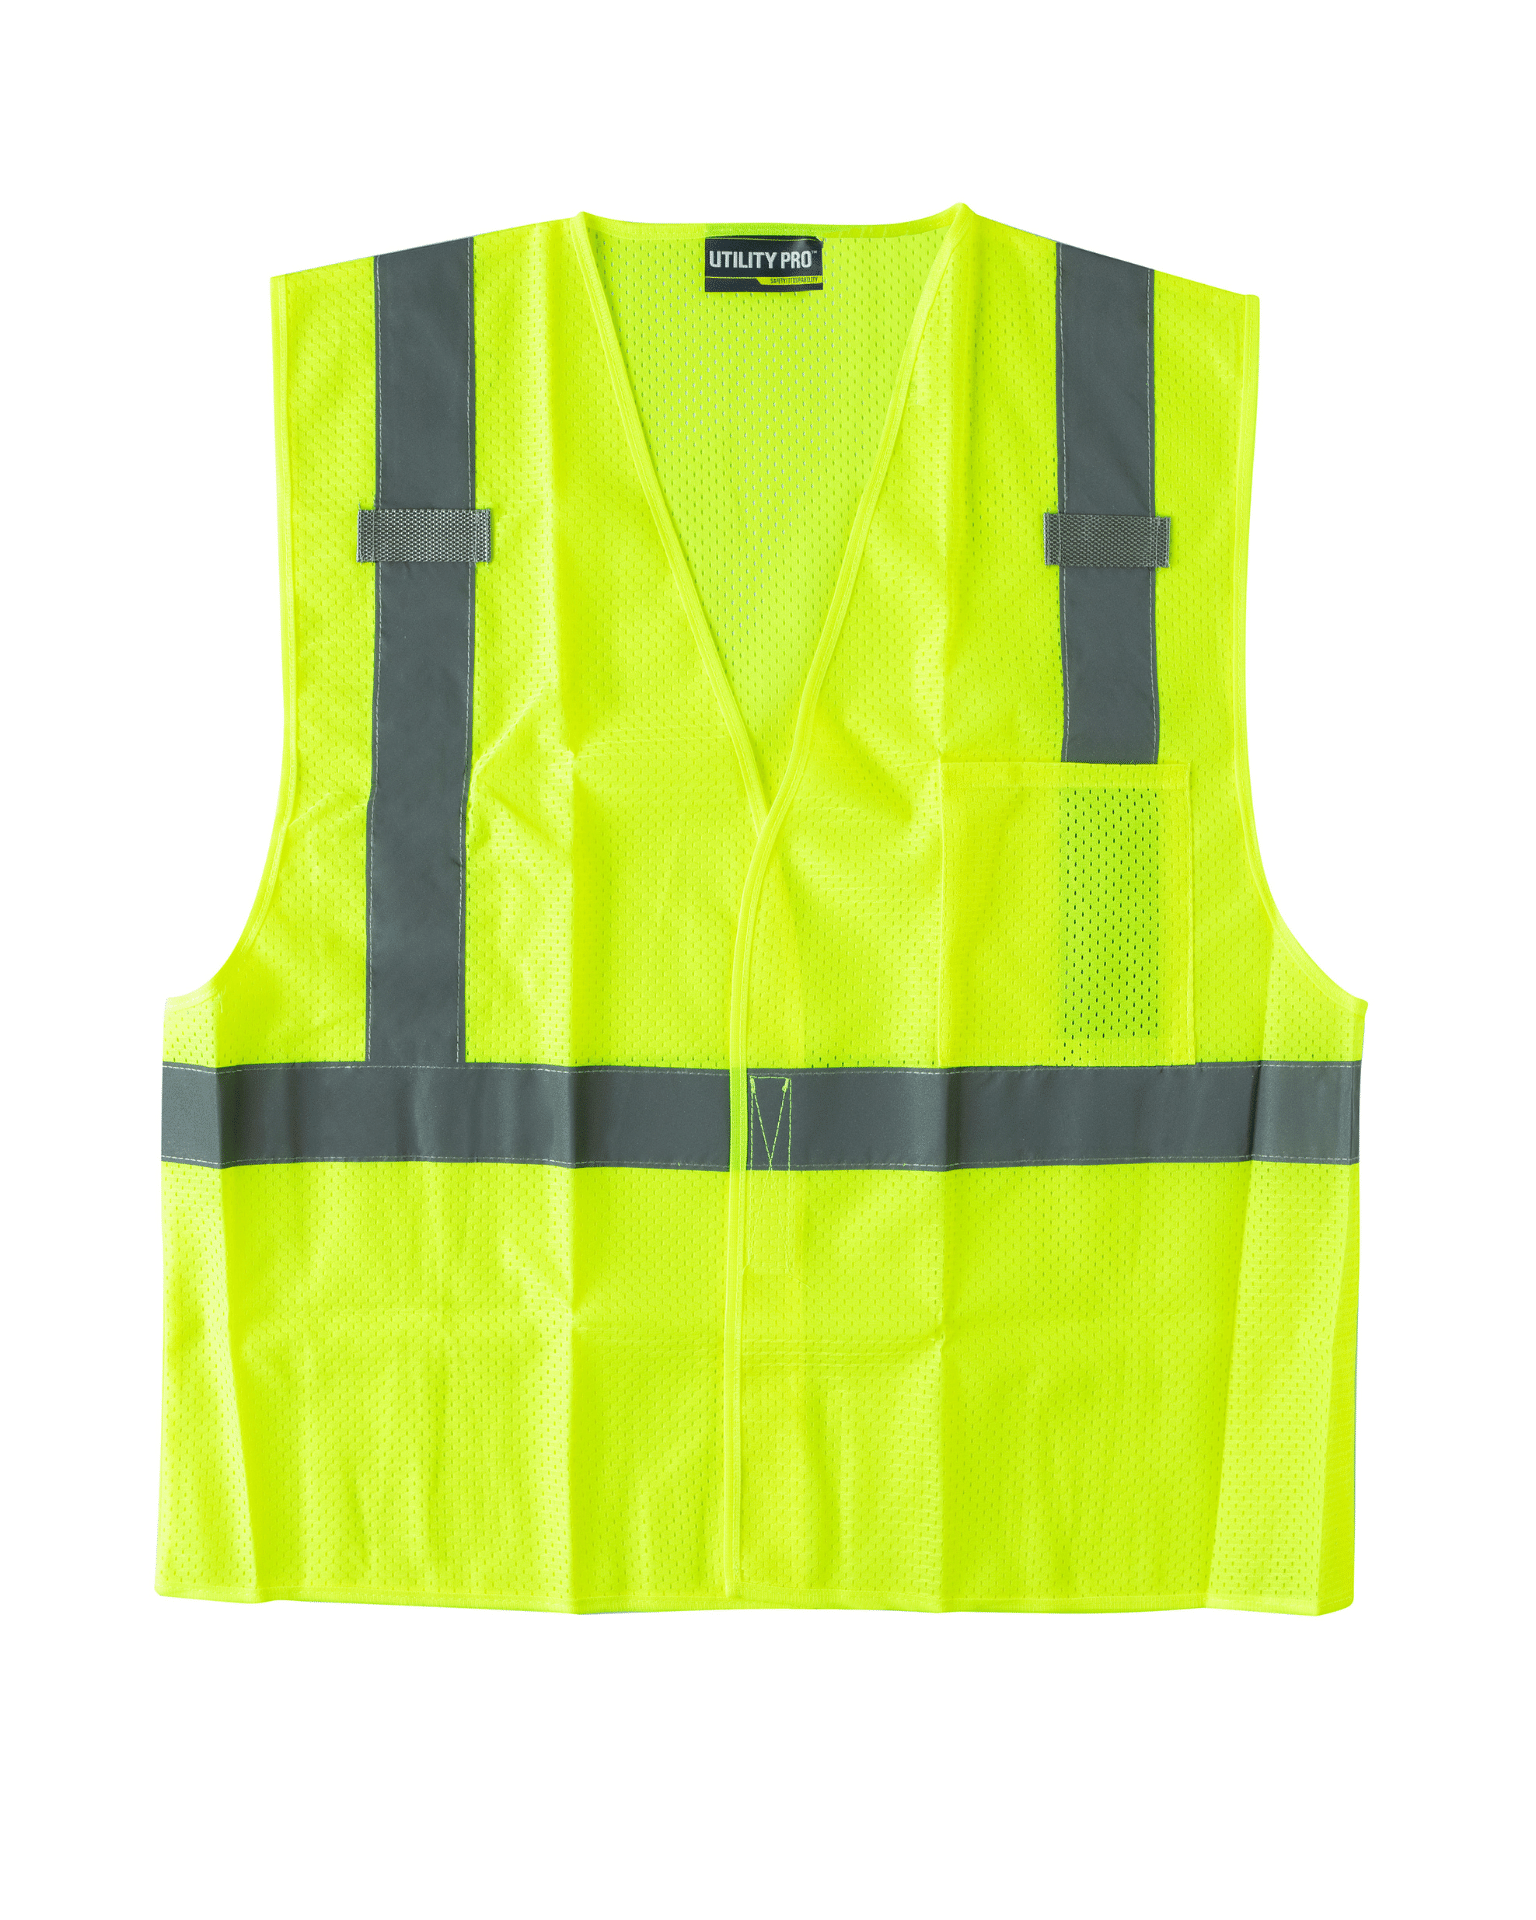 UPA472 High Visibility Mesh Vests - Utility Pro Wear